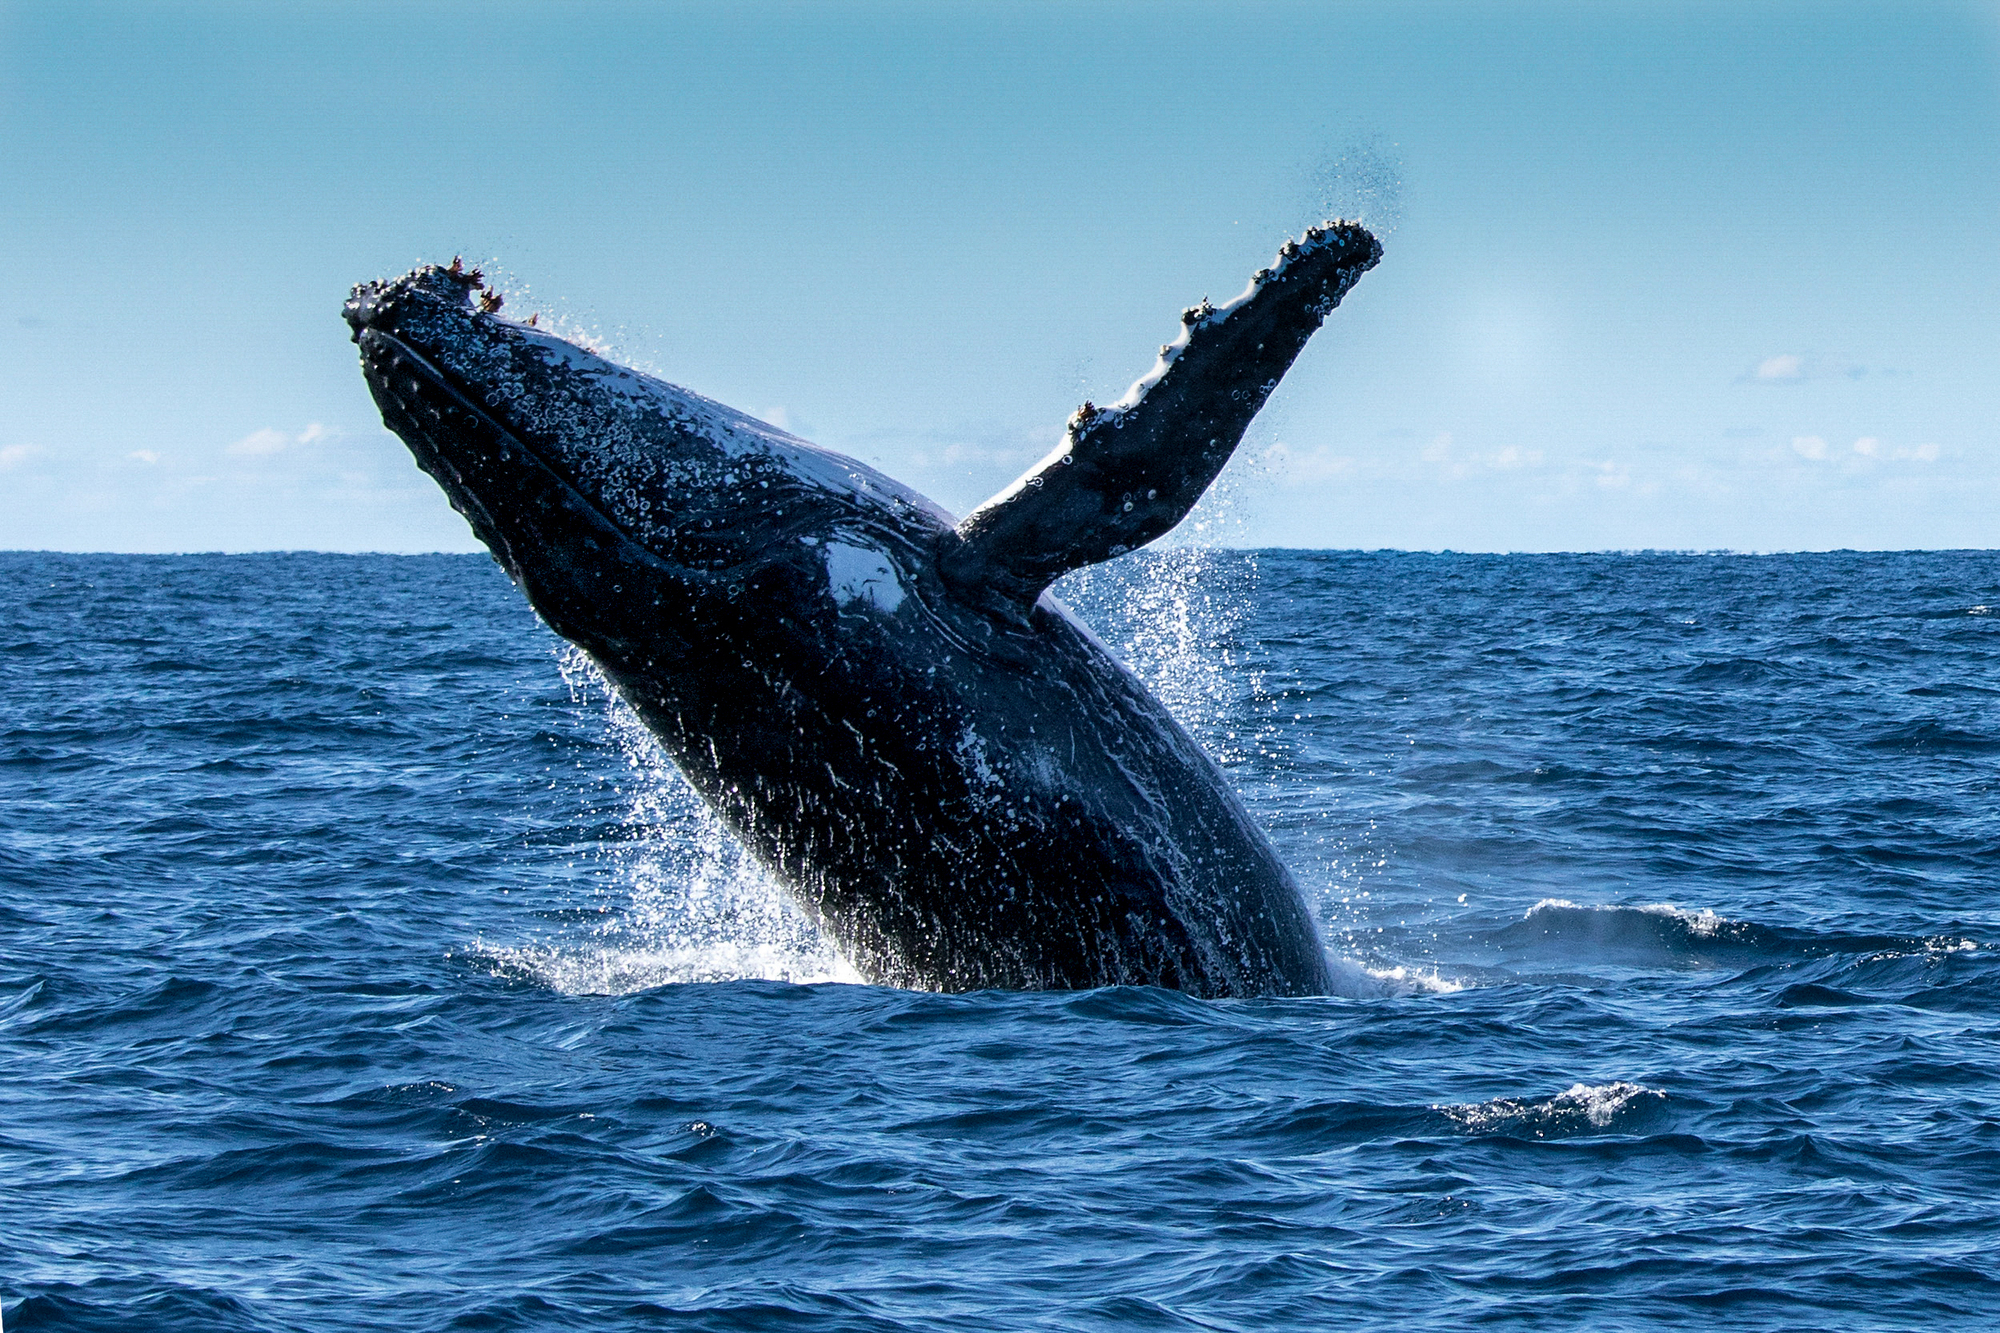 humpback whale breaching at waters surface